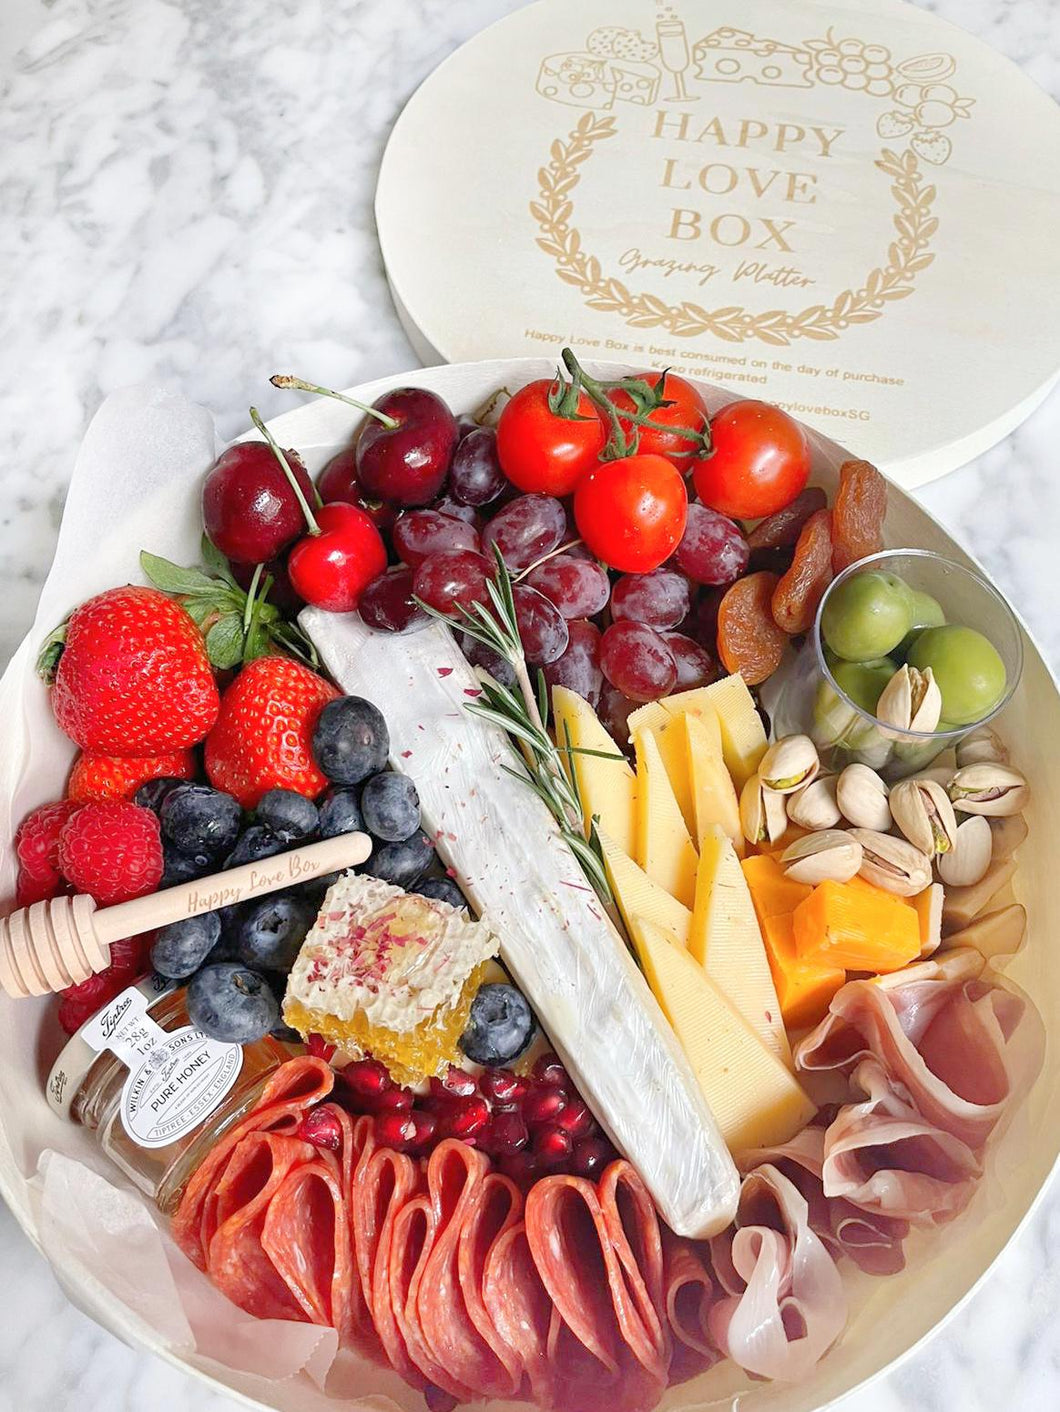 Truffle Brie Party box